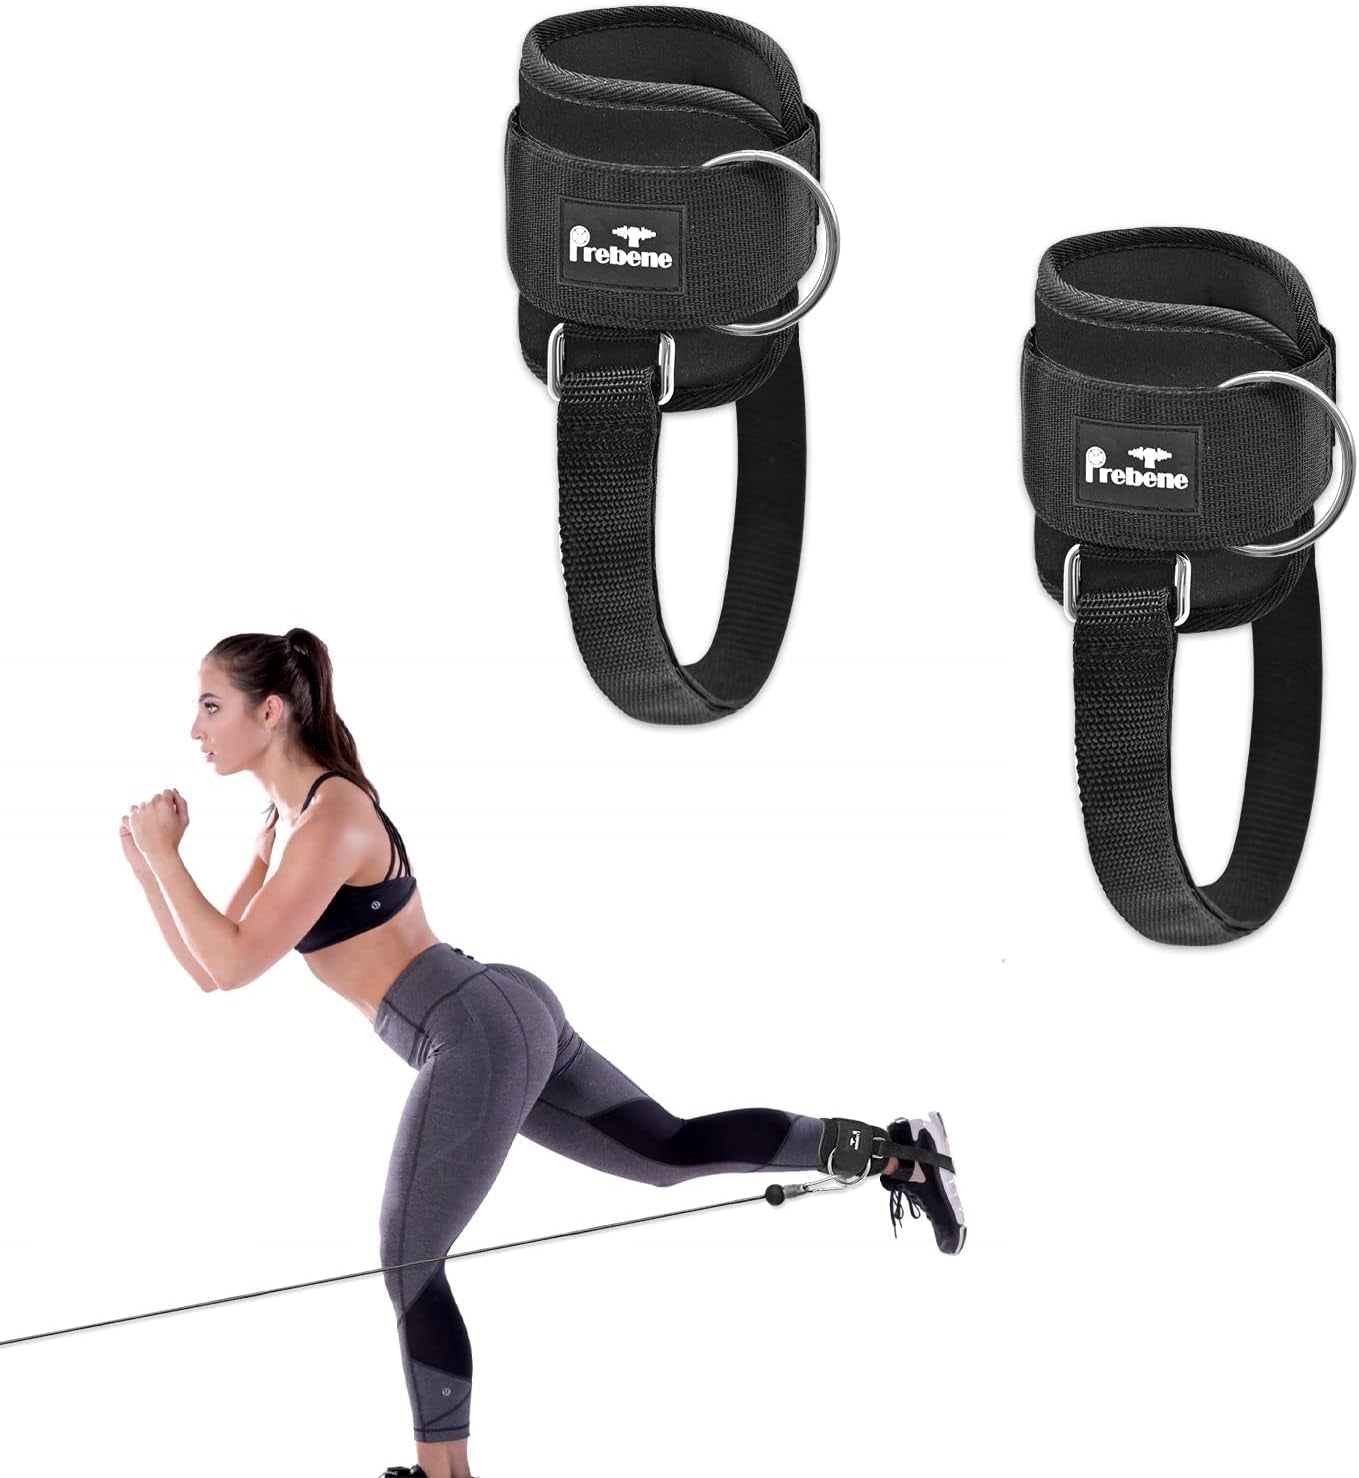 Ankle Strap for Cable Machines, Adaptive O-Ring for Glute & Leg Workouts